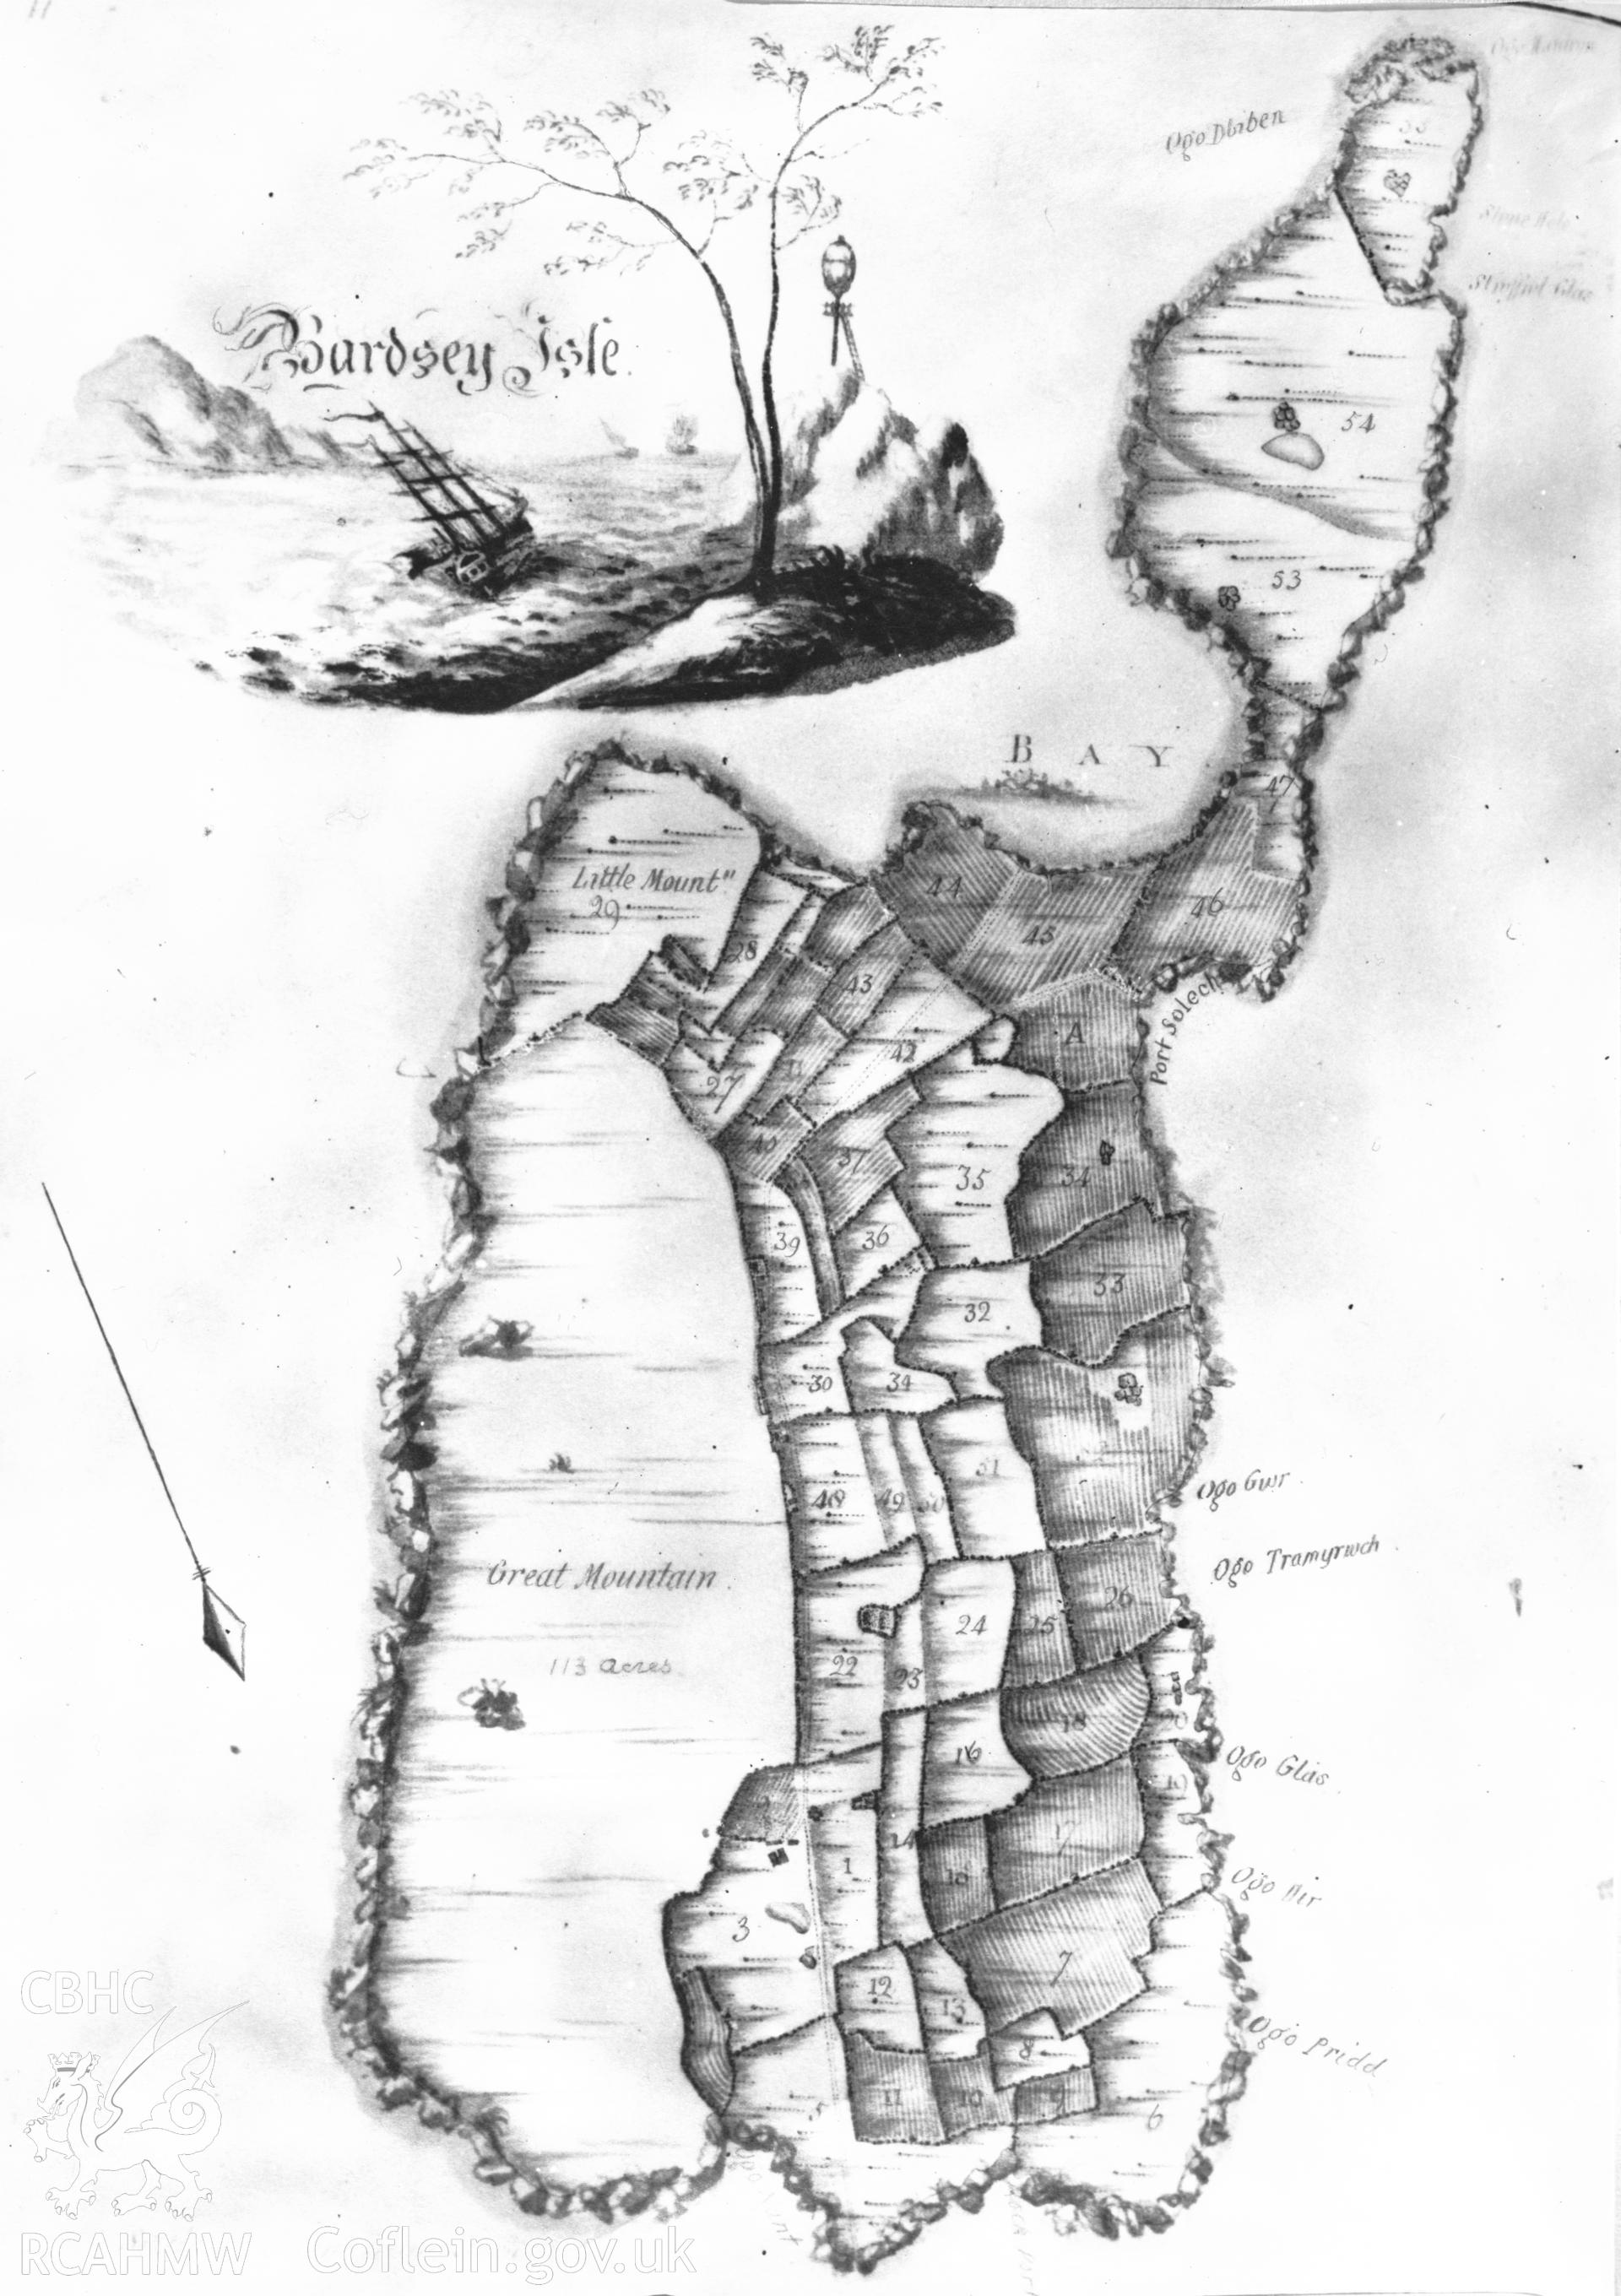 Black and white acetate negative showing an early map of Bardsey Island.